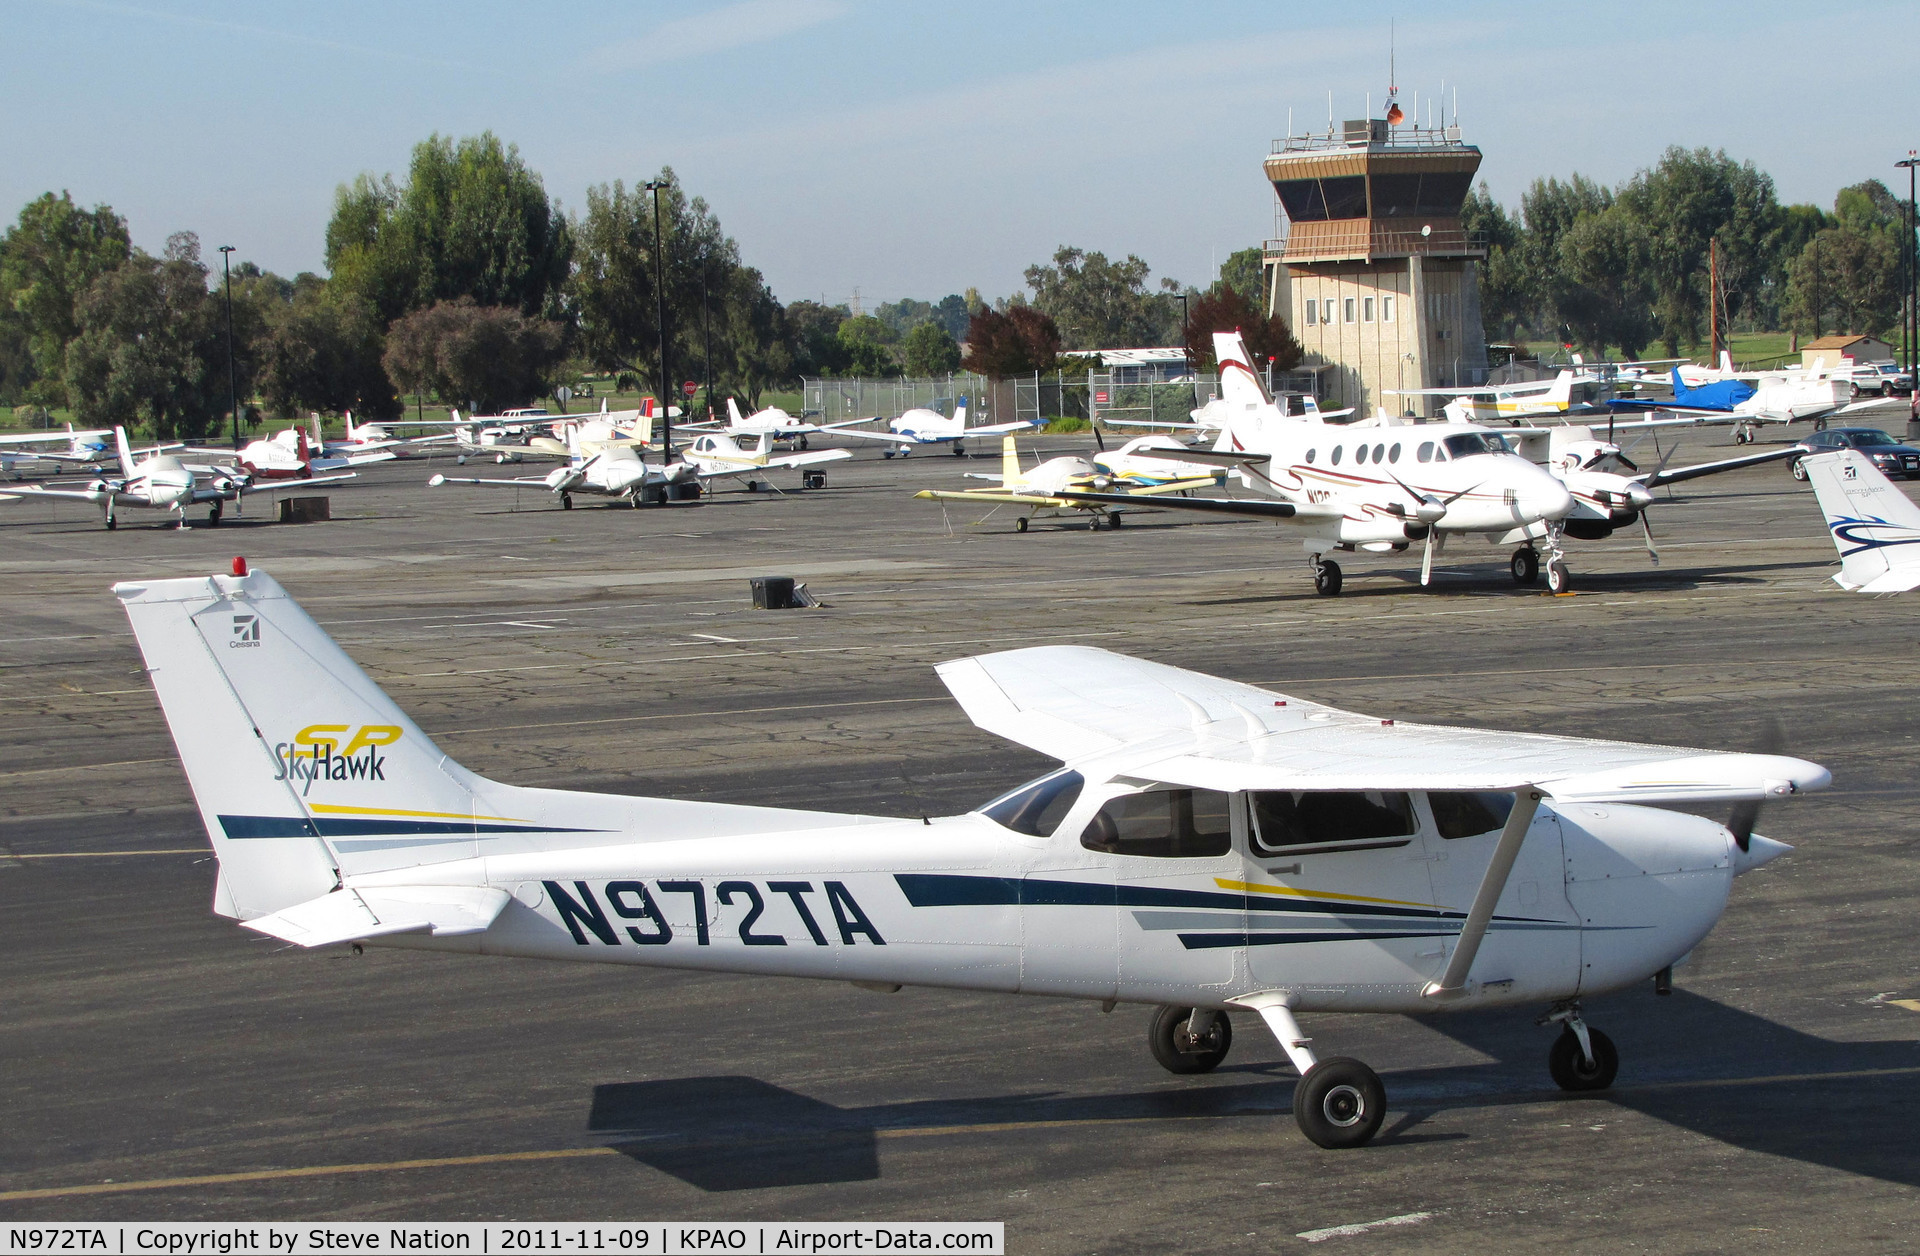 N972TA, 2002 Cessna 172S C/N 172S9171, Confluence Systems Consulting (San Jose, CA) 2002 Cessna 172S running-up engine @ Palo Alto, CA